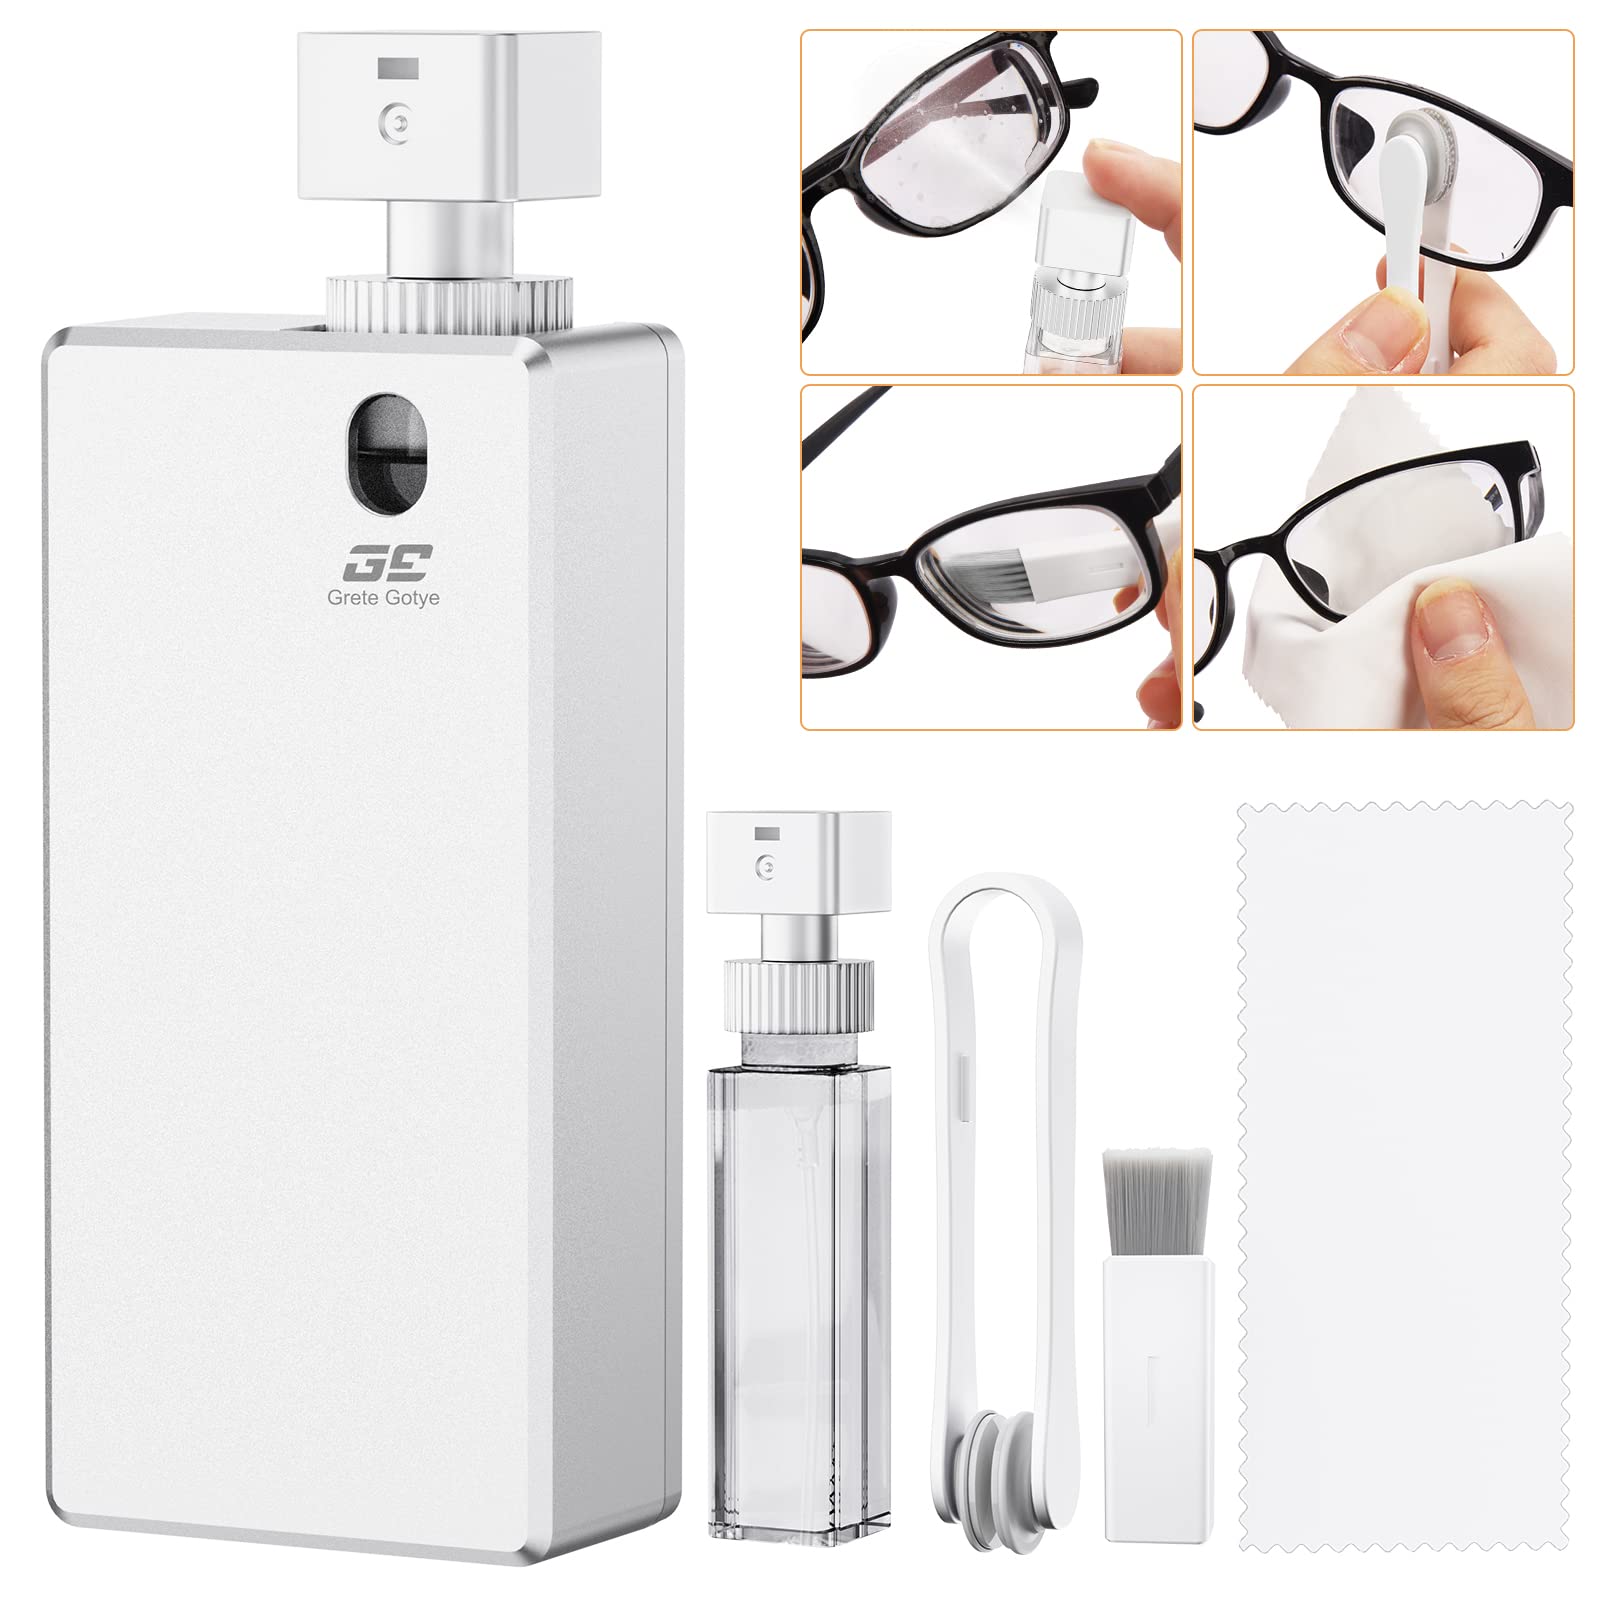  Eyeglass Cleaner Kit for Cleaning Glasses, 5-in-1 Eye Glasses  Lens CleanerCleaner Tool Case+Anti-Fog Mist Cleaner Spray+Soft  Brush+Recyclable Sunglasses Lens Clamp Clip+Microfiber Cloth for Travel :  Health & Household